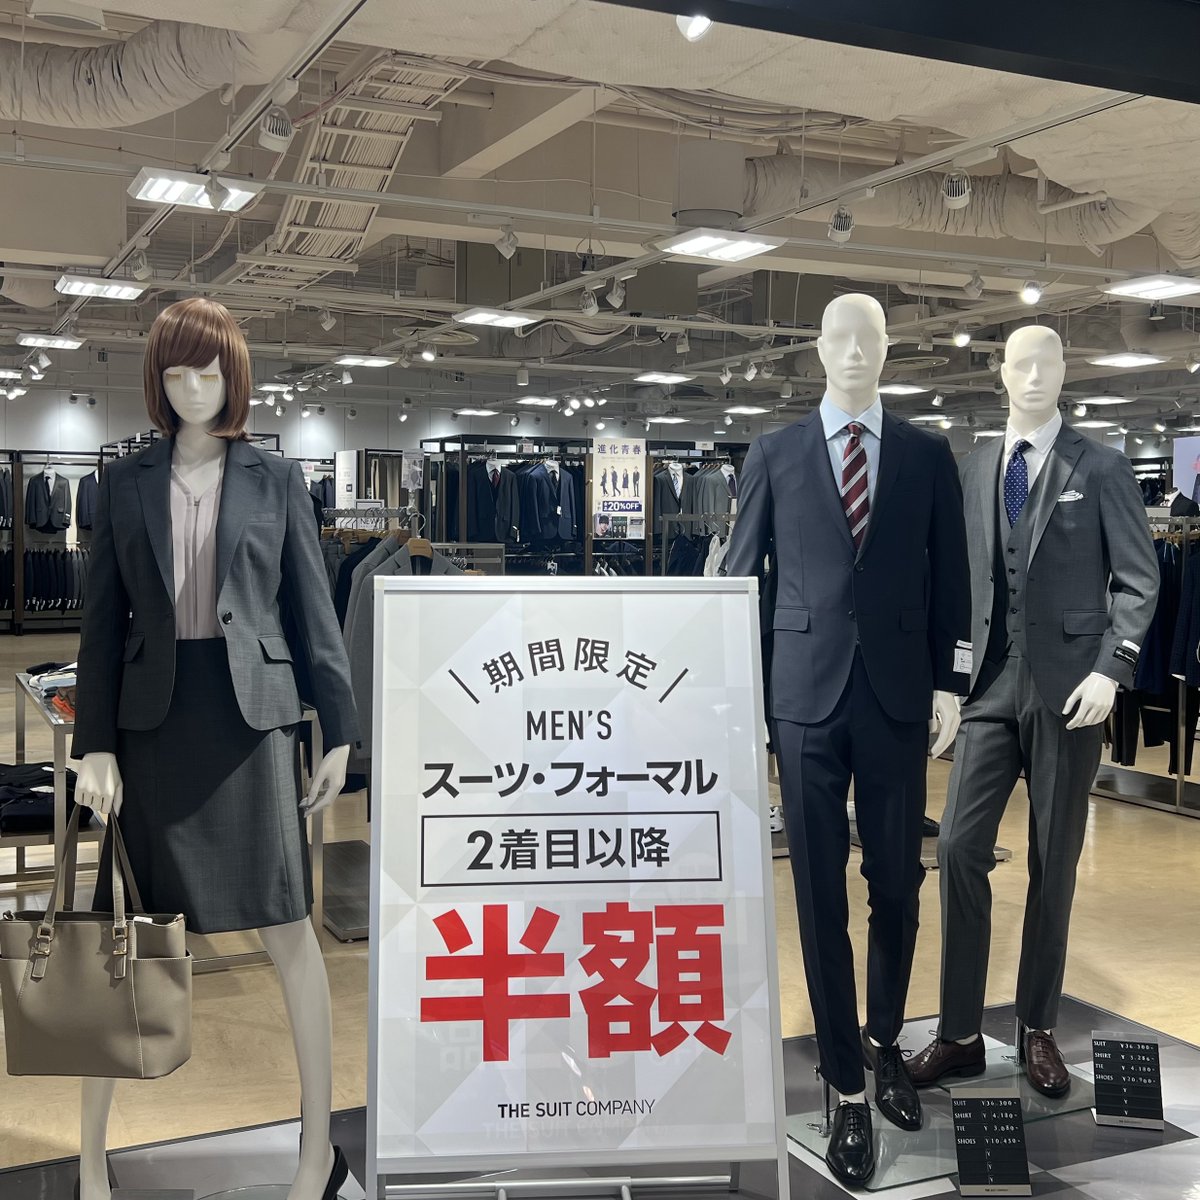 THE SUIT COMPANY (@the_suitcompany) / Twitter